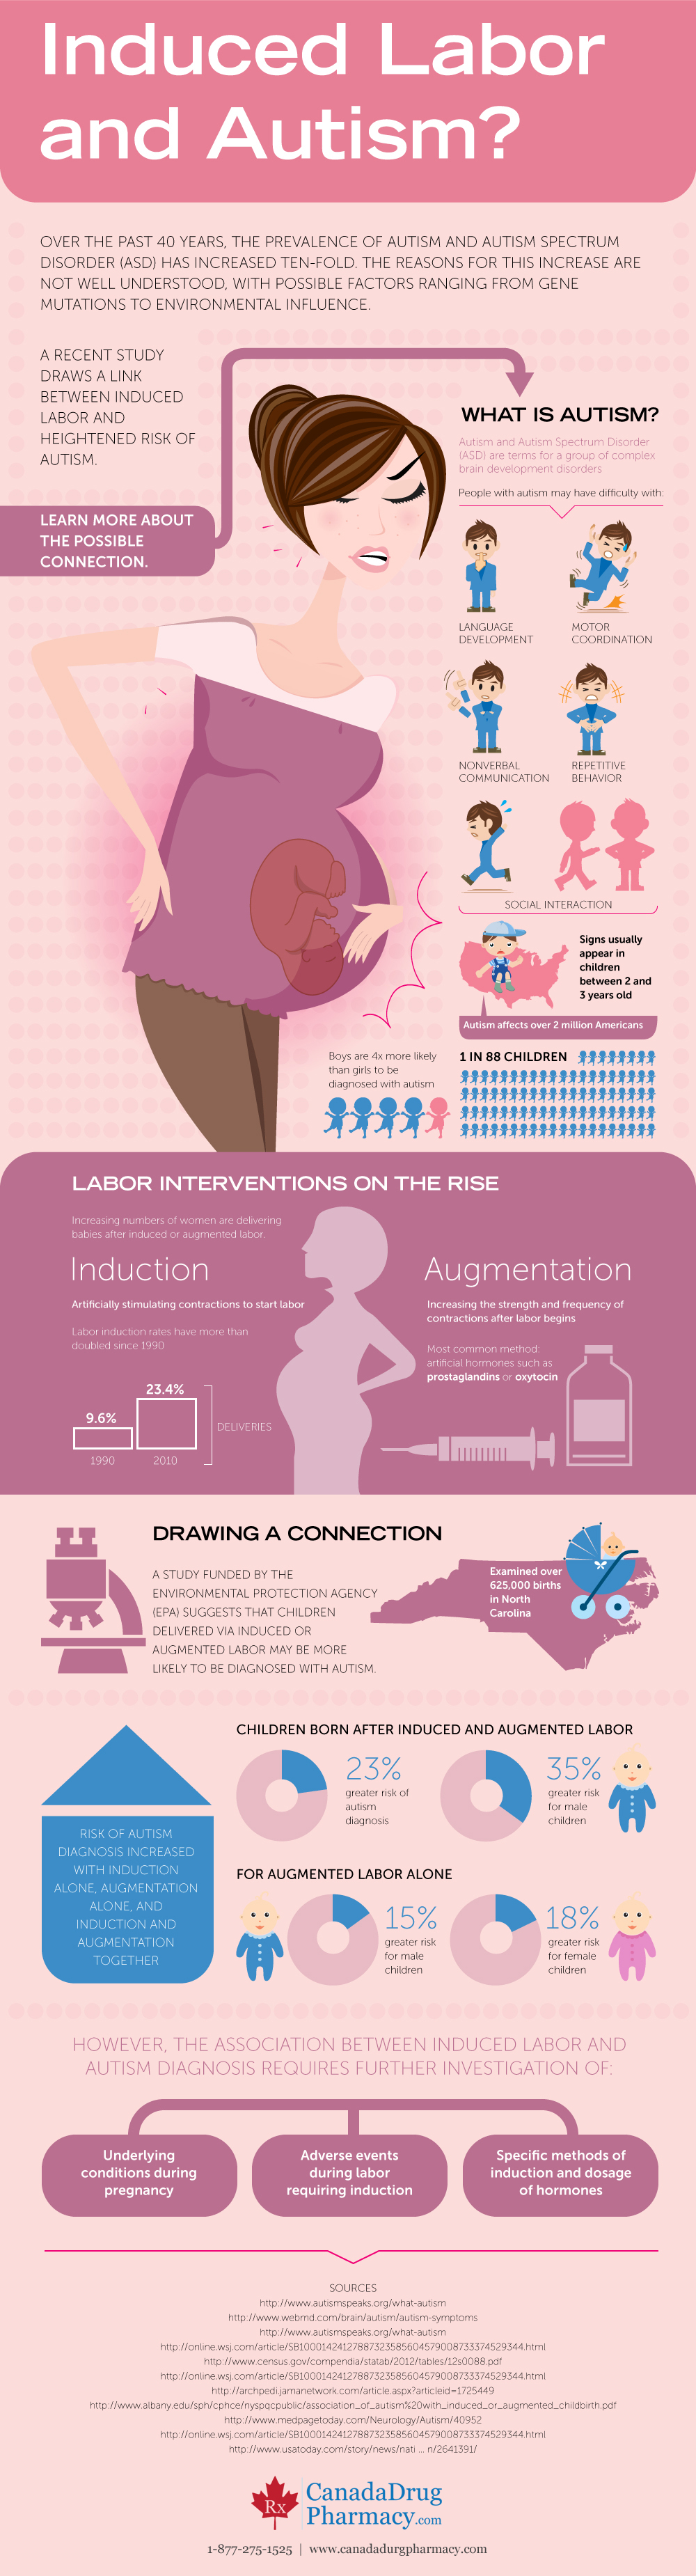 Effects of Inducing Labor